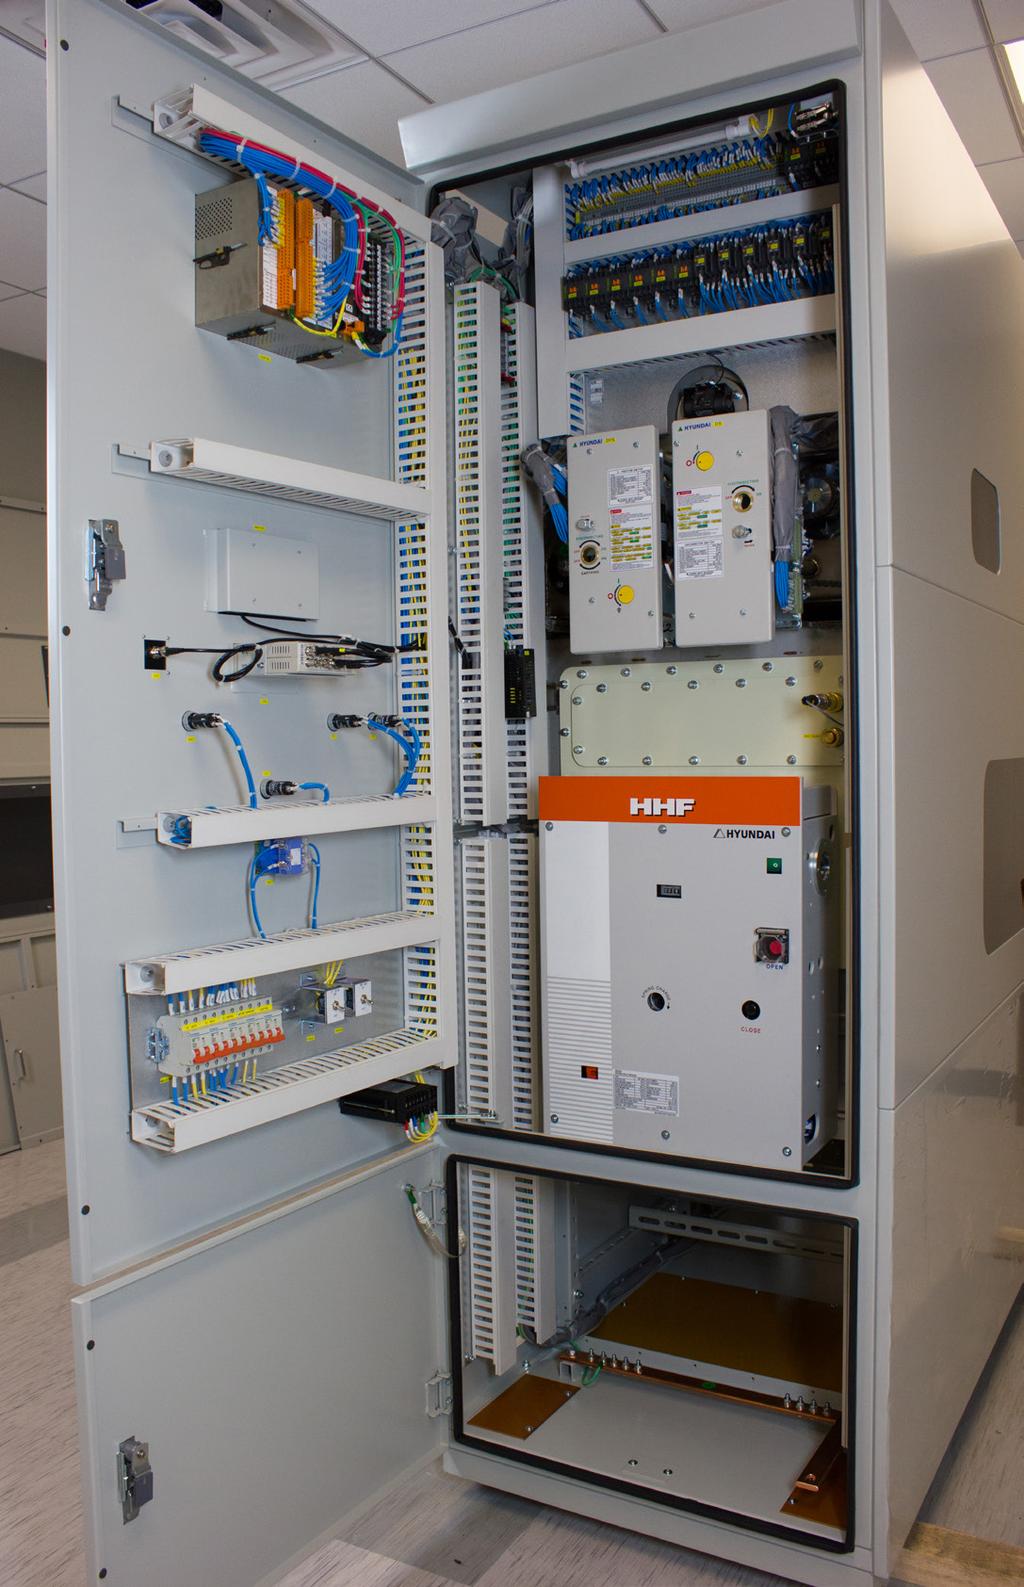 This includes all switchgear engineering design, integration, control and monitoring capabilities.